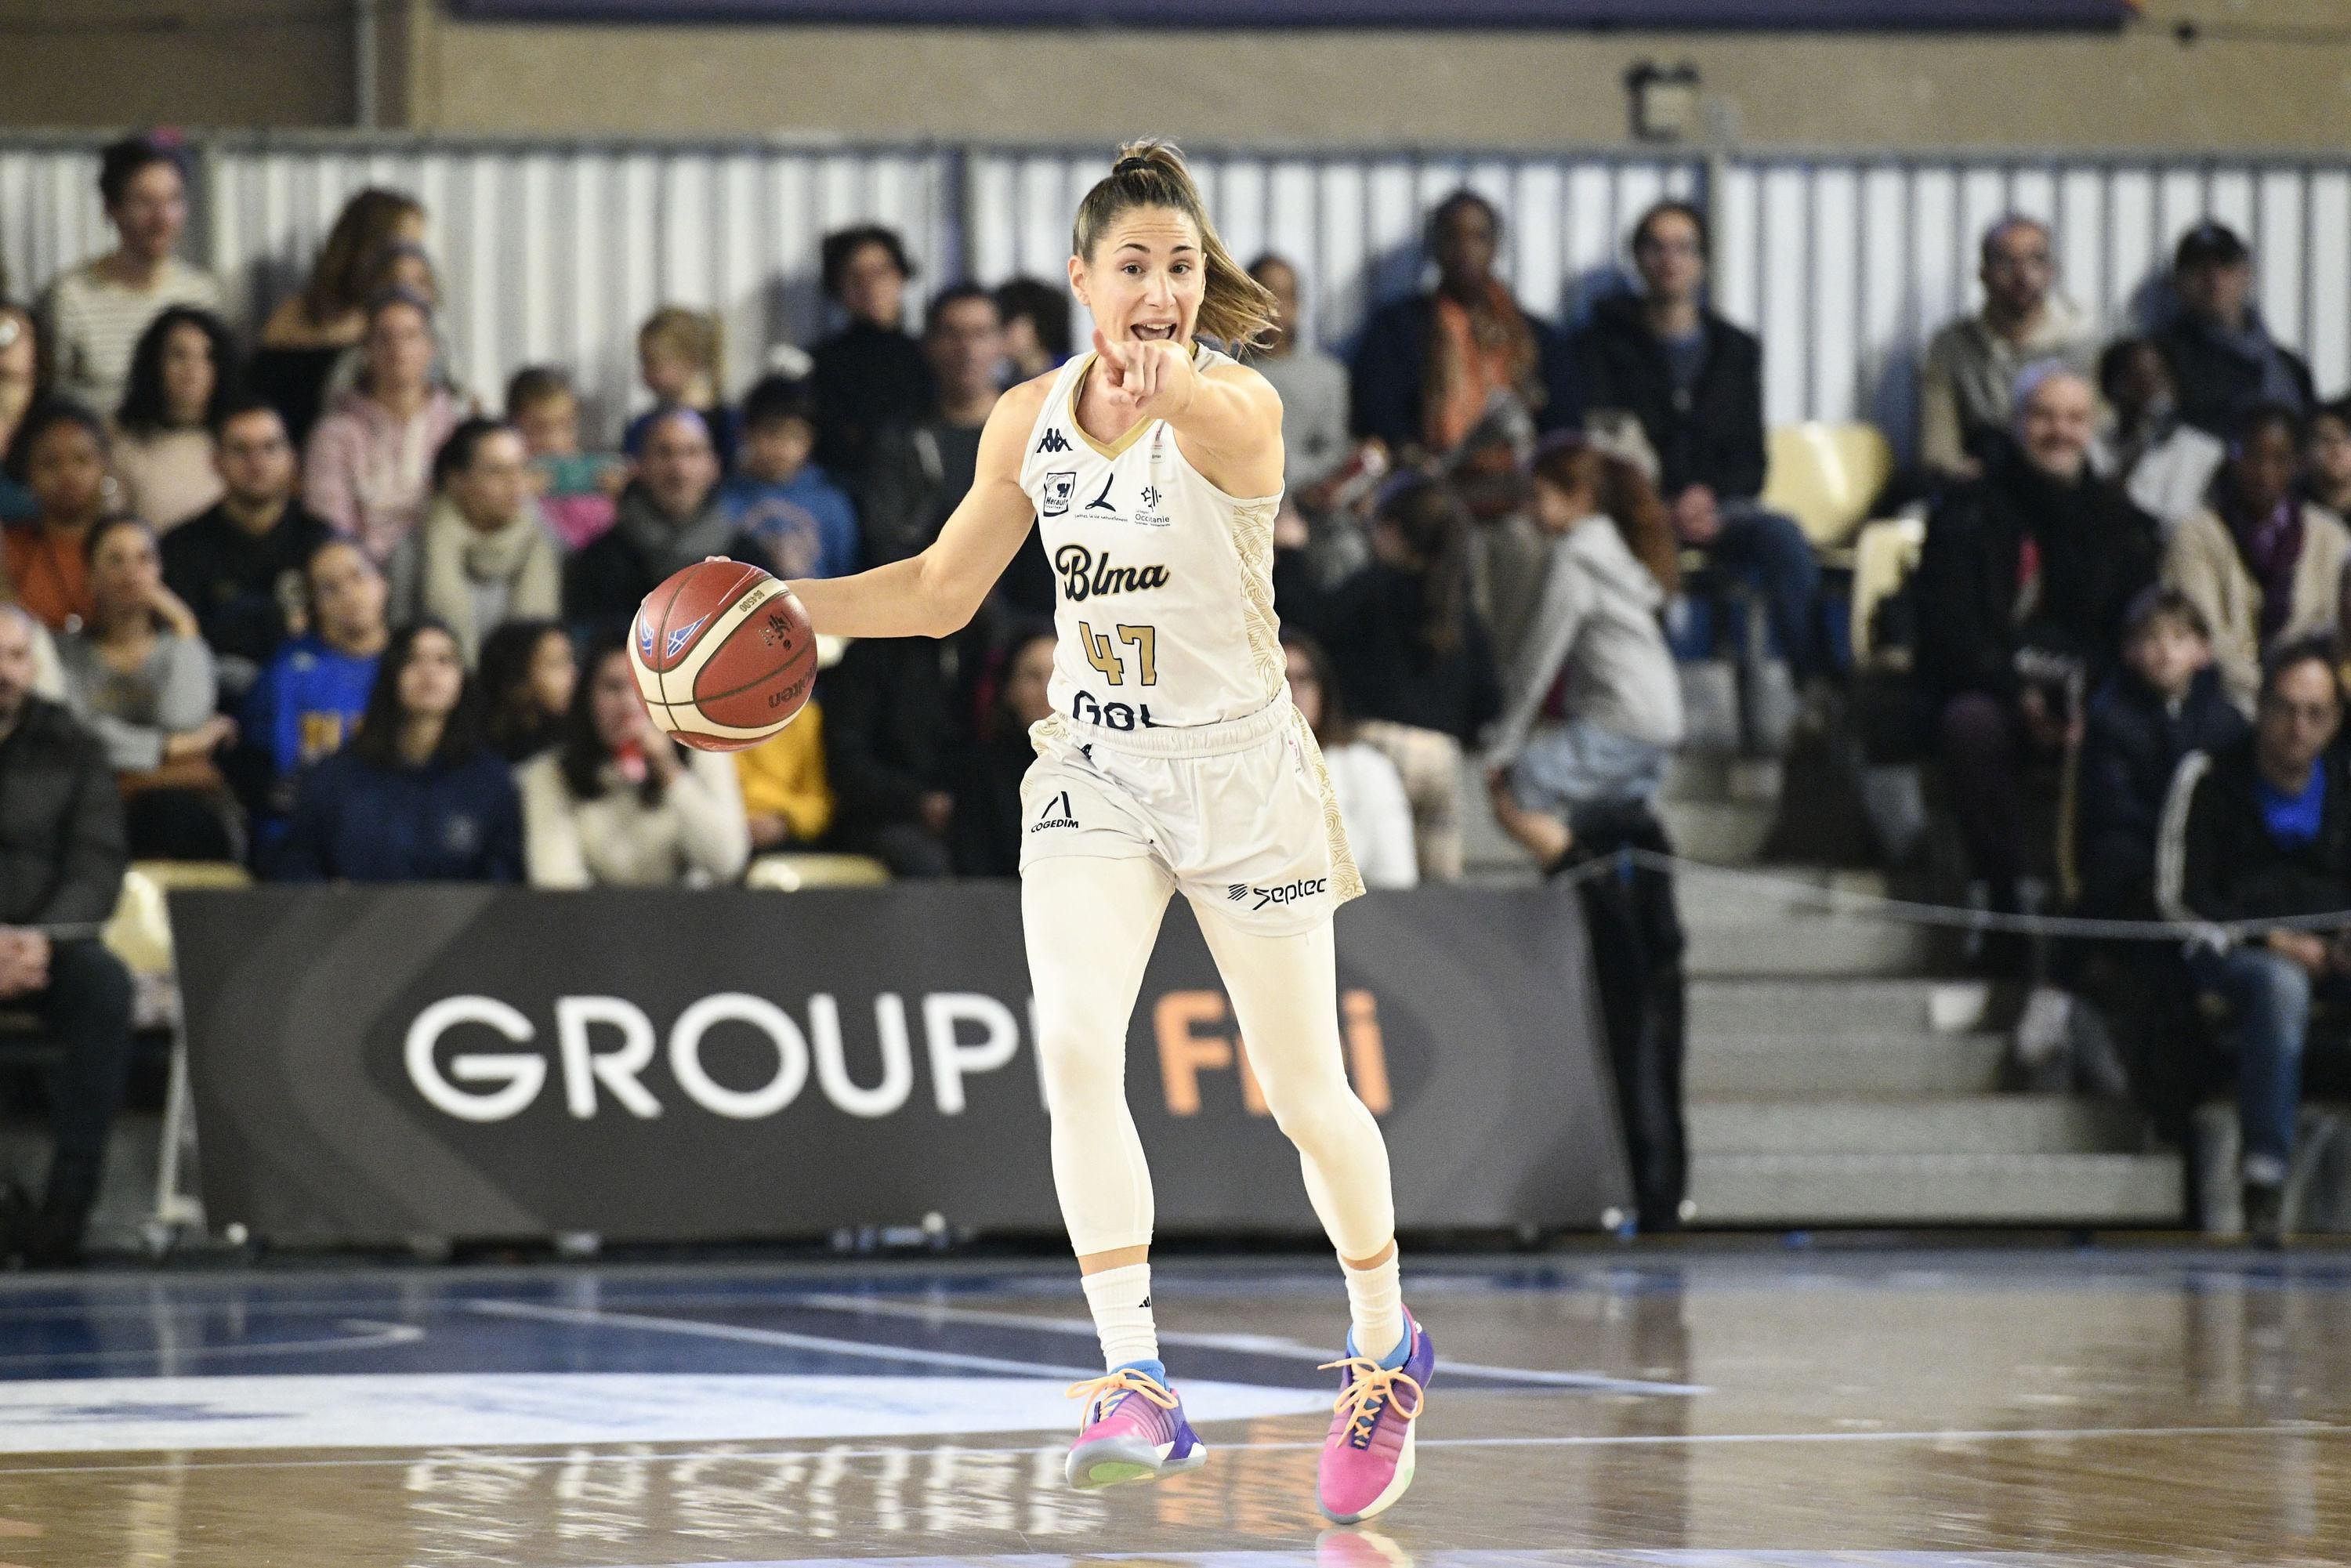 Basketball: Villeneuve-d’Ascq and Lattes Montpellier in the semi-finals of the Women’s League